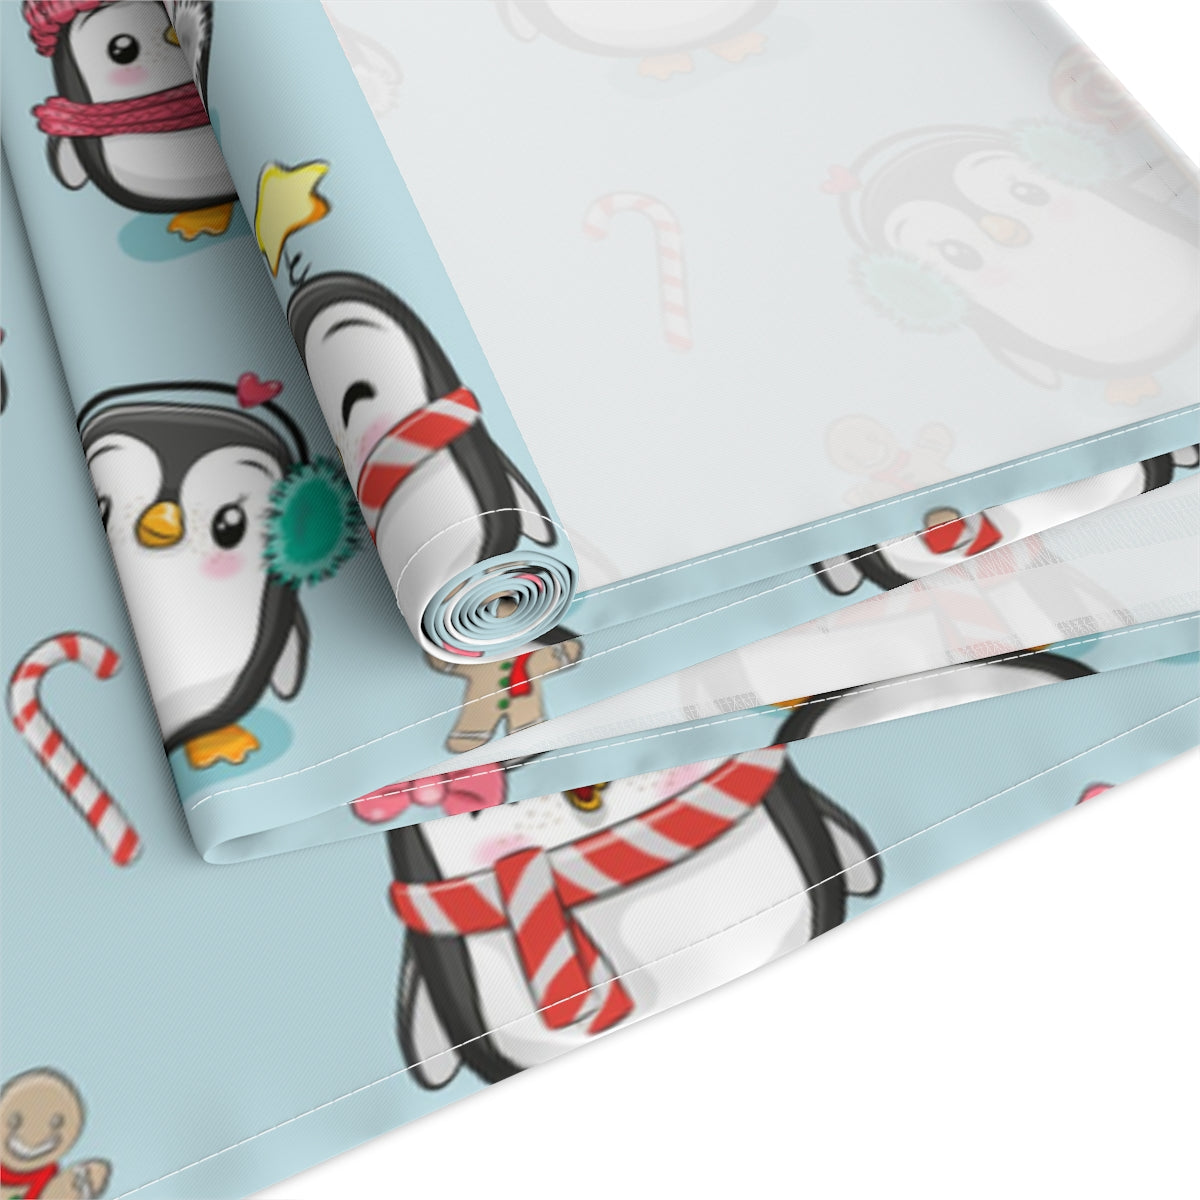 Penguins in Winter Clothes Table Runner